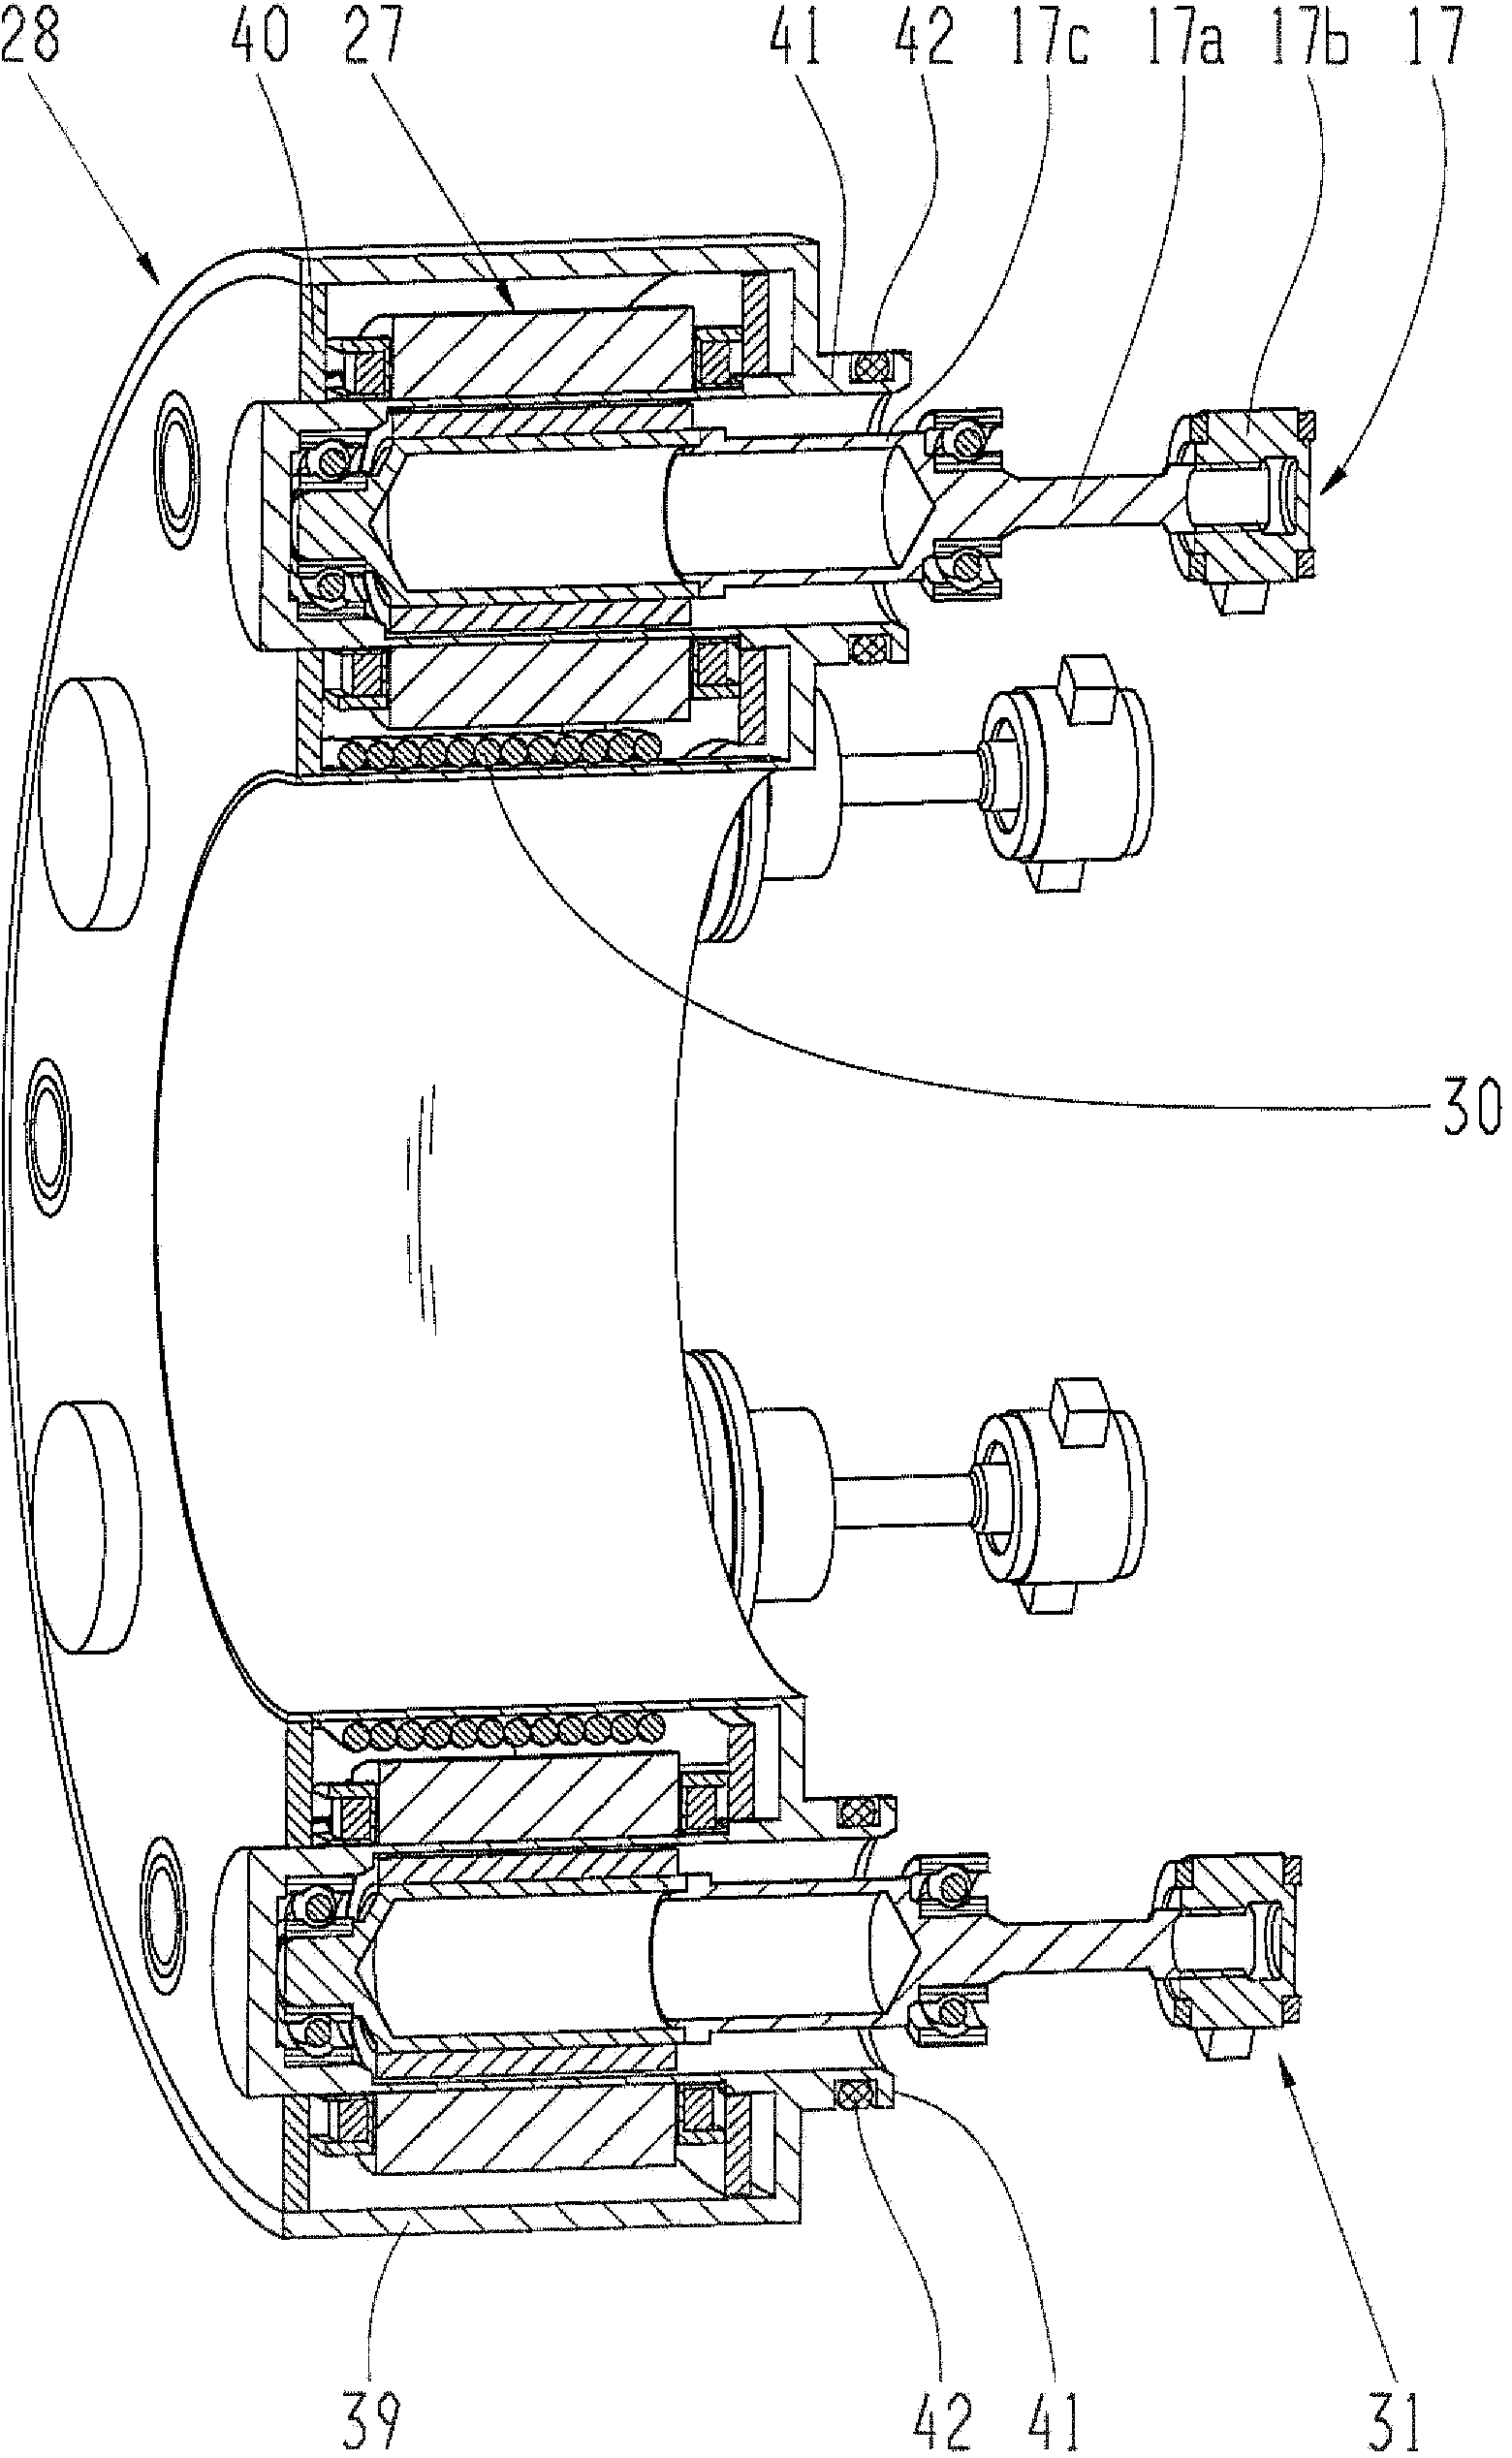 Device for controlling a flow of coolant and/or lubricating oil